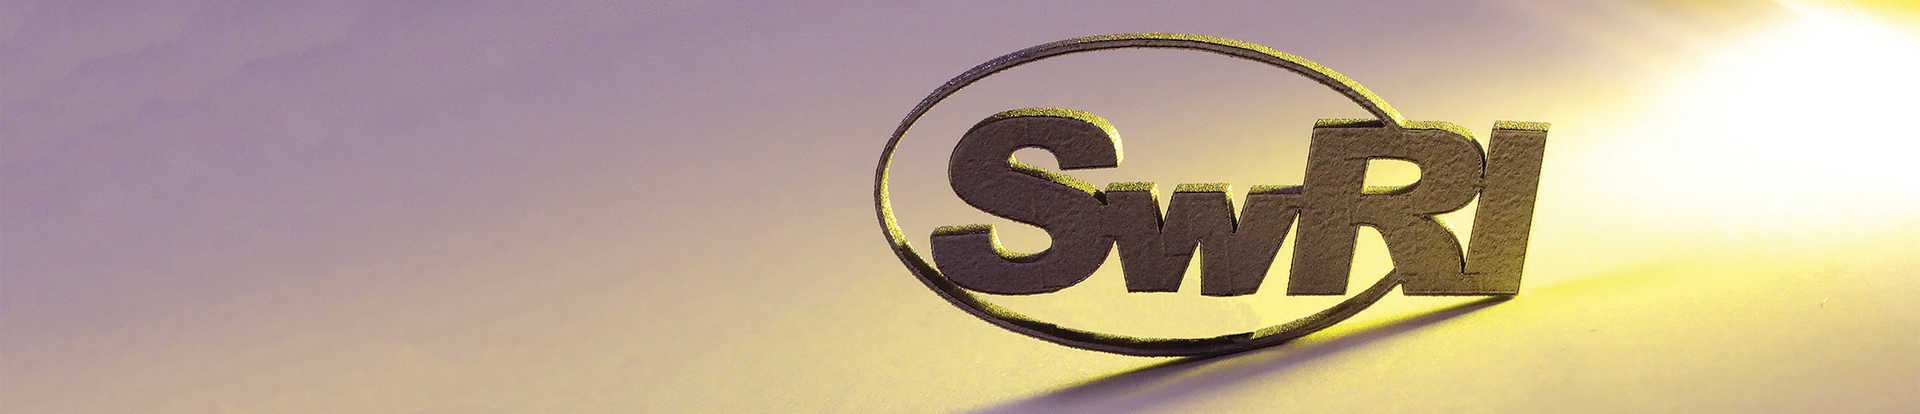 SwRI logo cut from a titanium block with a shadow falling on the left side